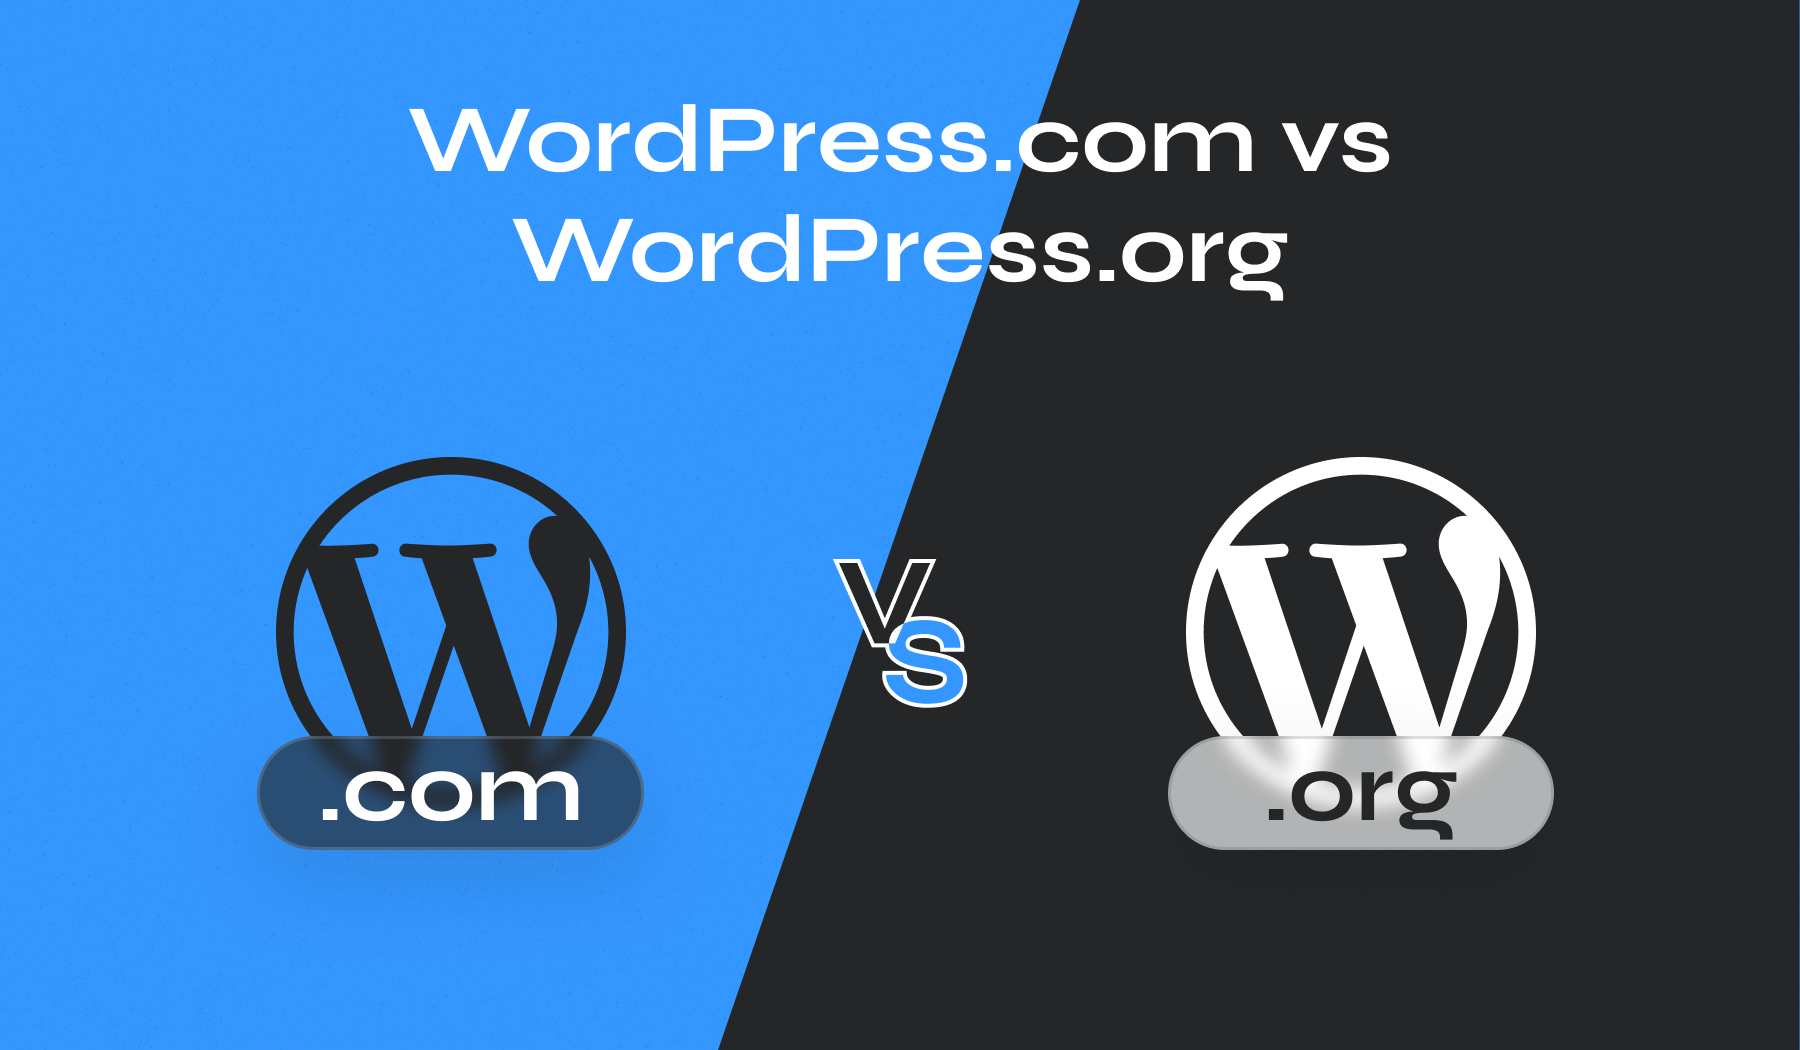 WordPress.com vs WordPress.org: What Is the Difference?